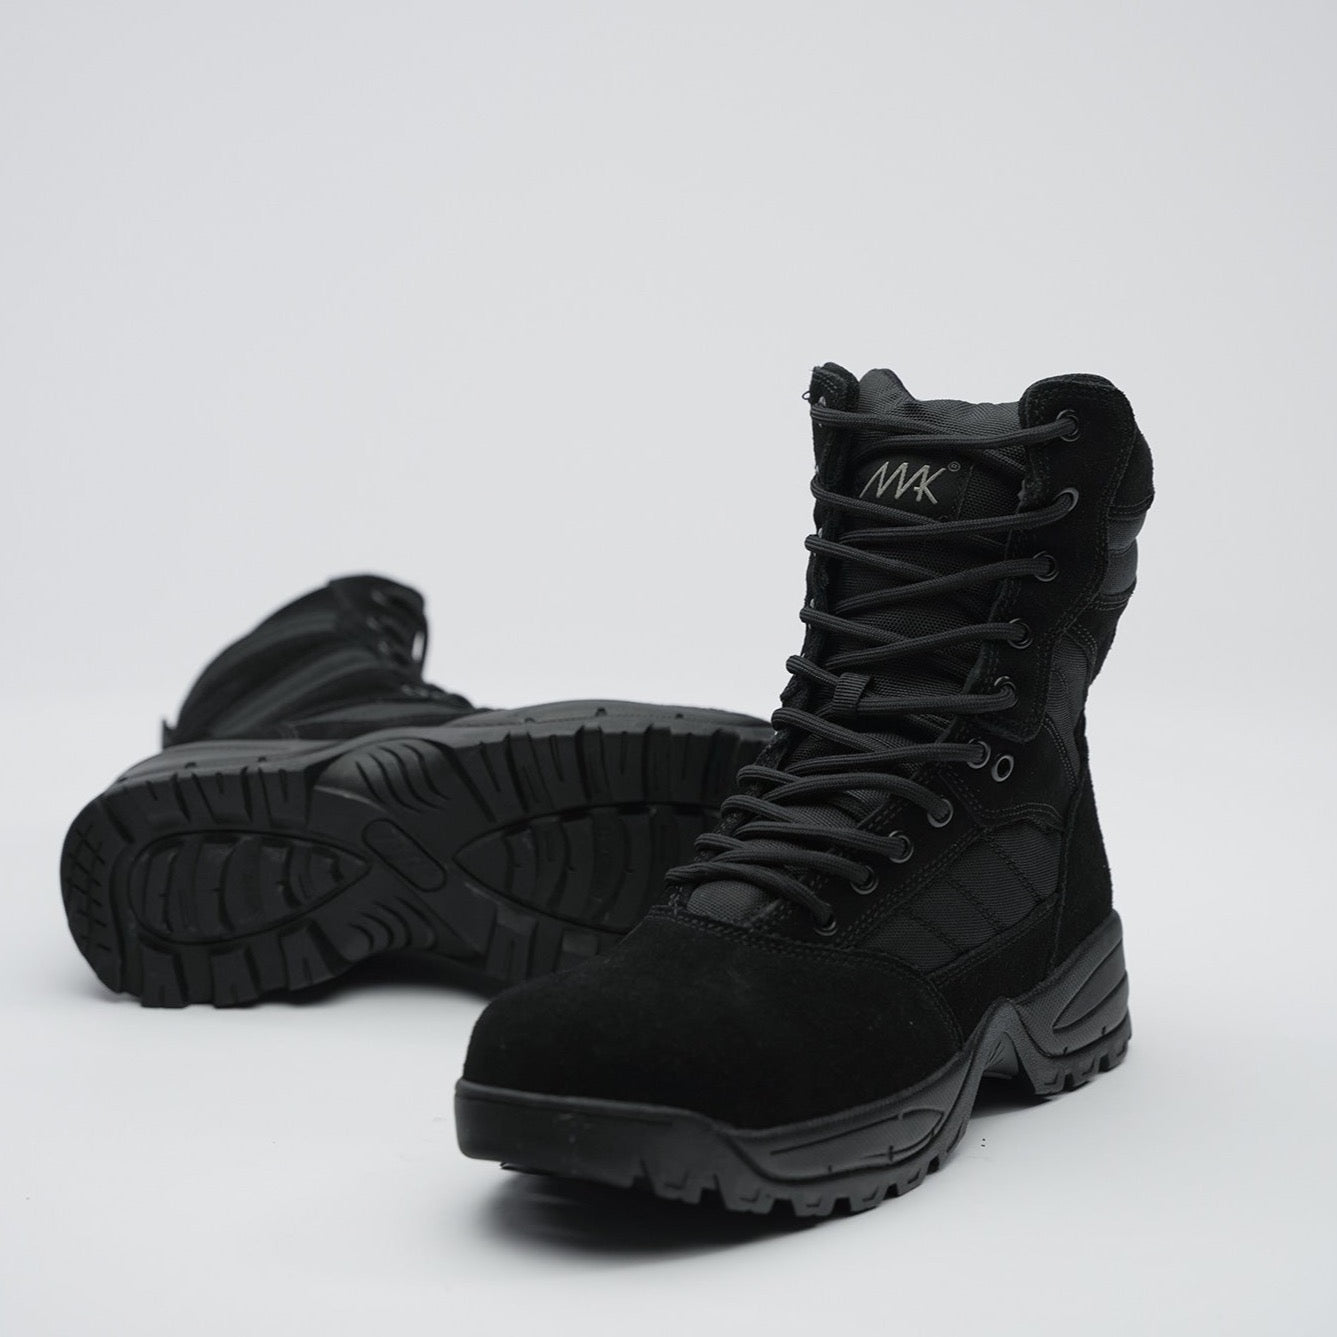 protector 9" black suede tactical boot front view